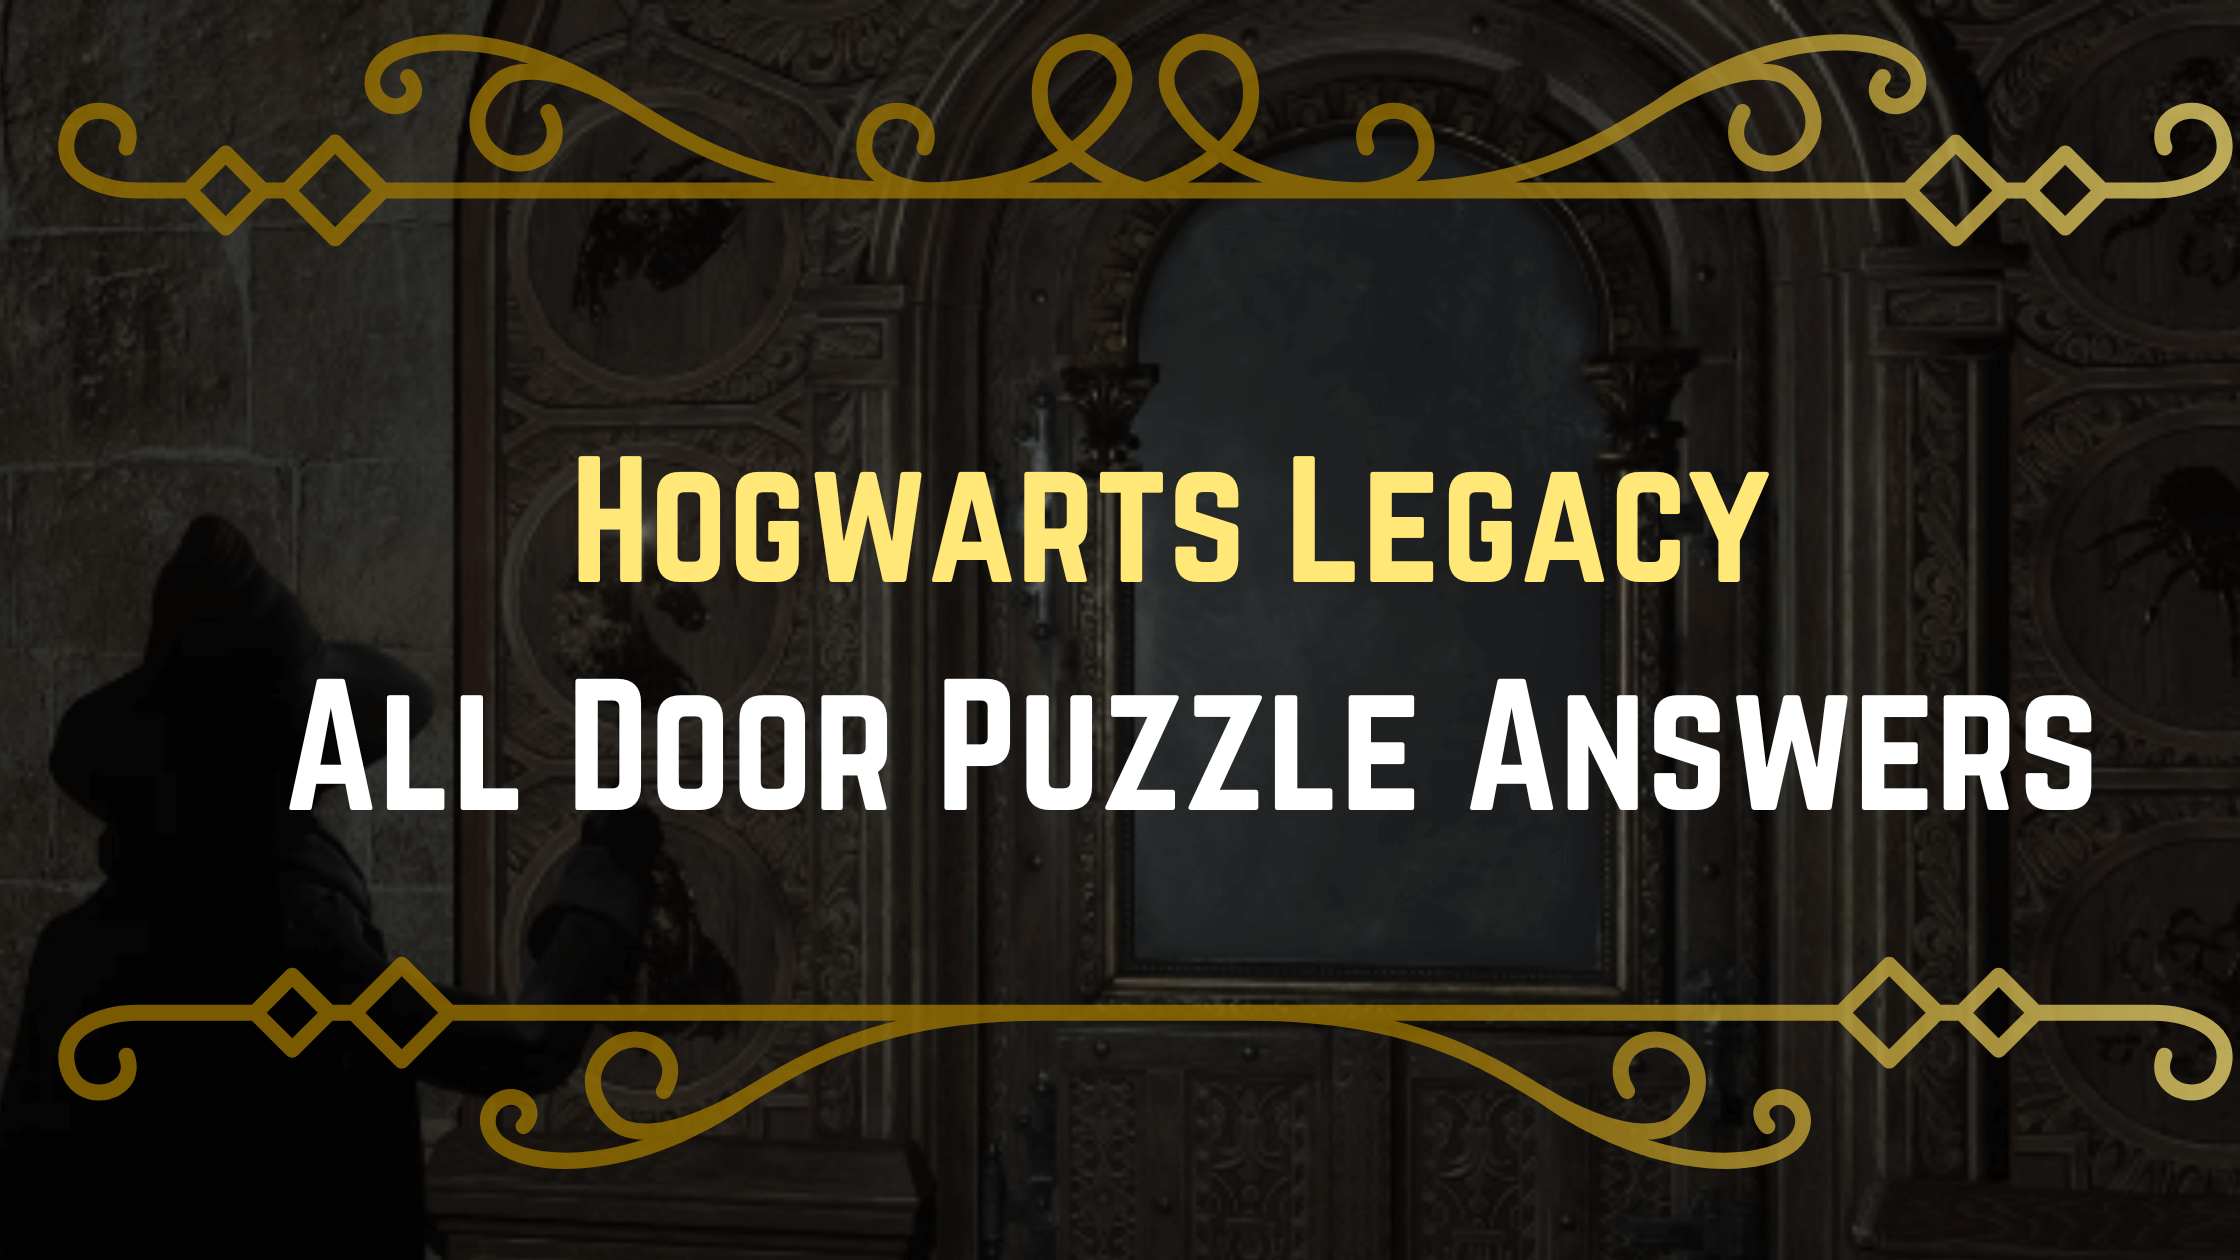 Hogwarts Legacy All Door Puzzle Answers